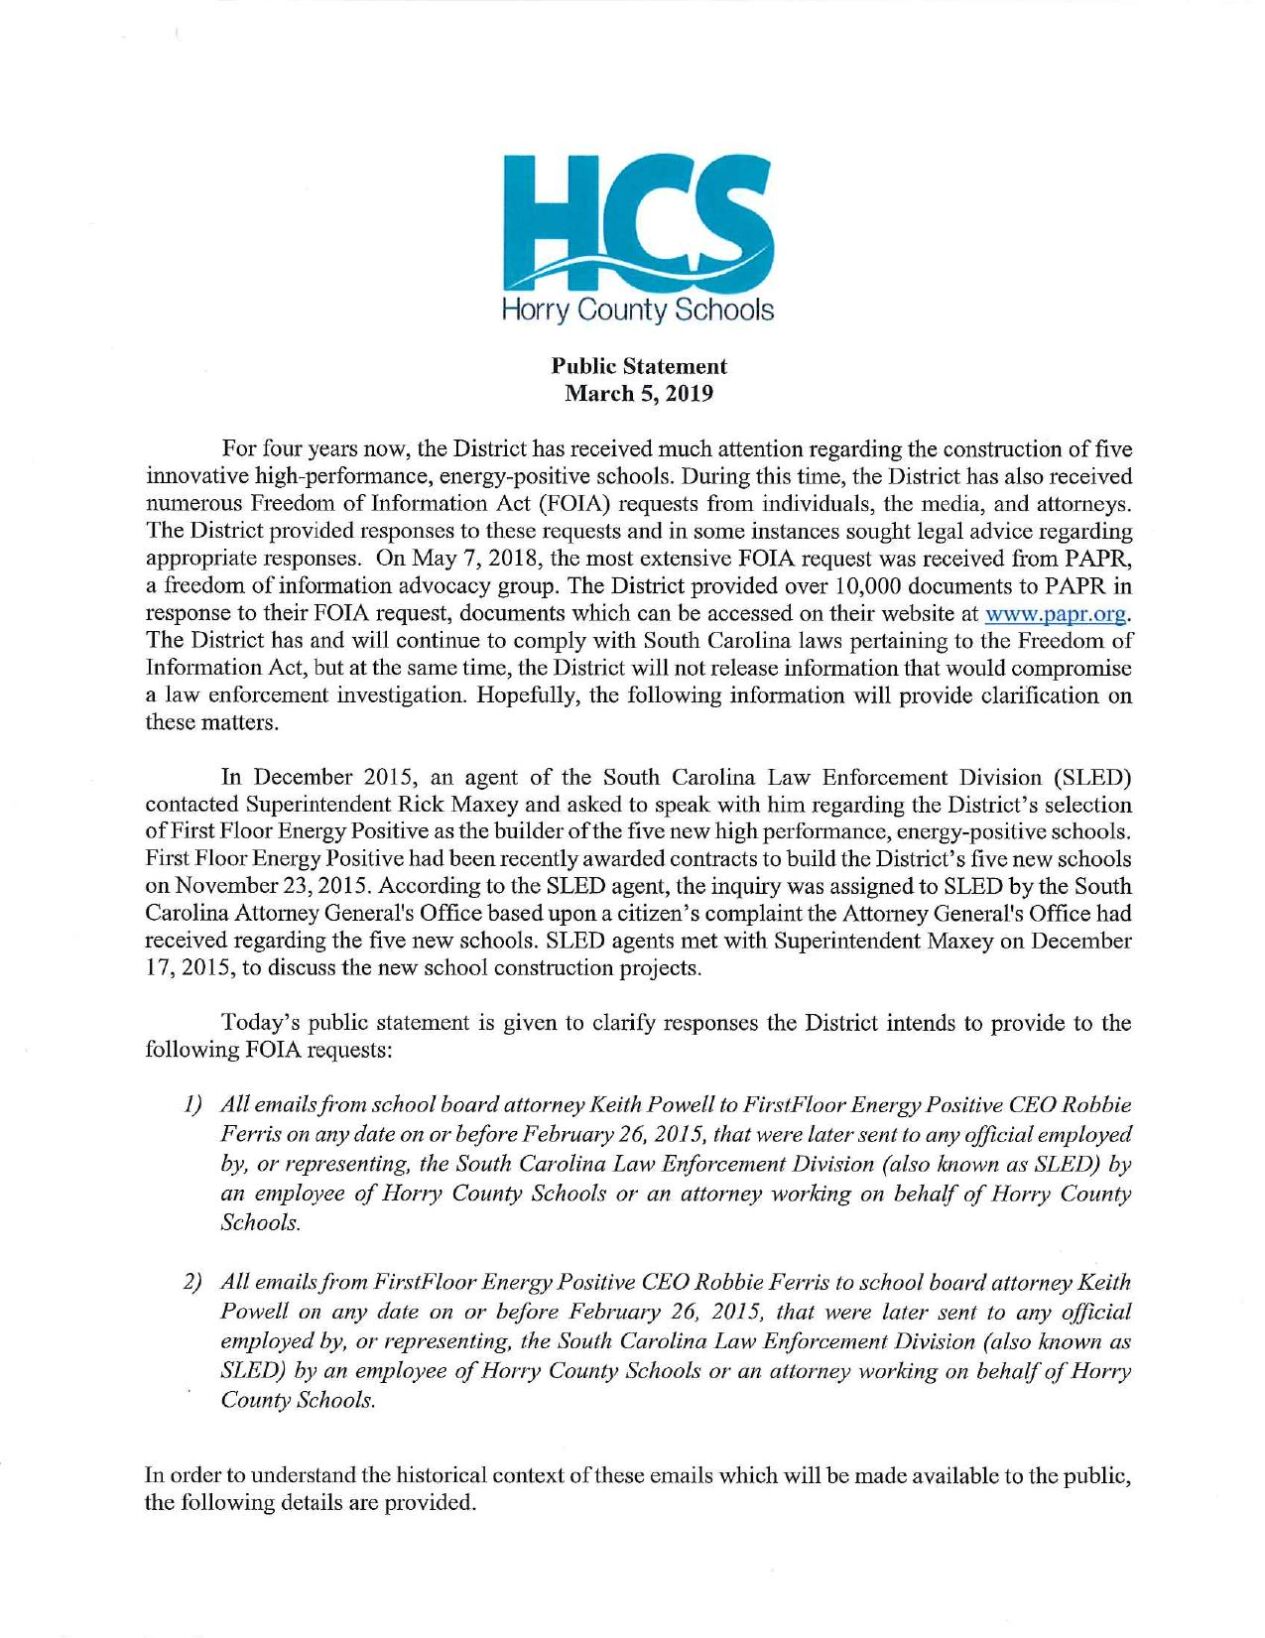 Horry County Schools' statement on SLED Investigation